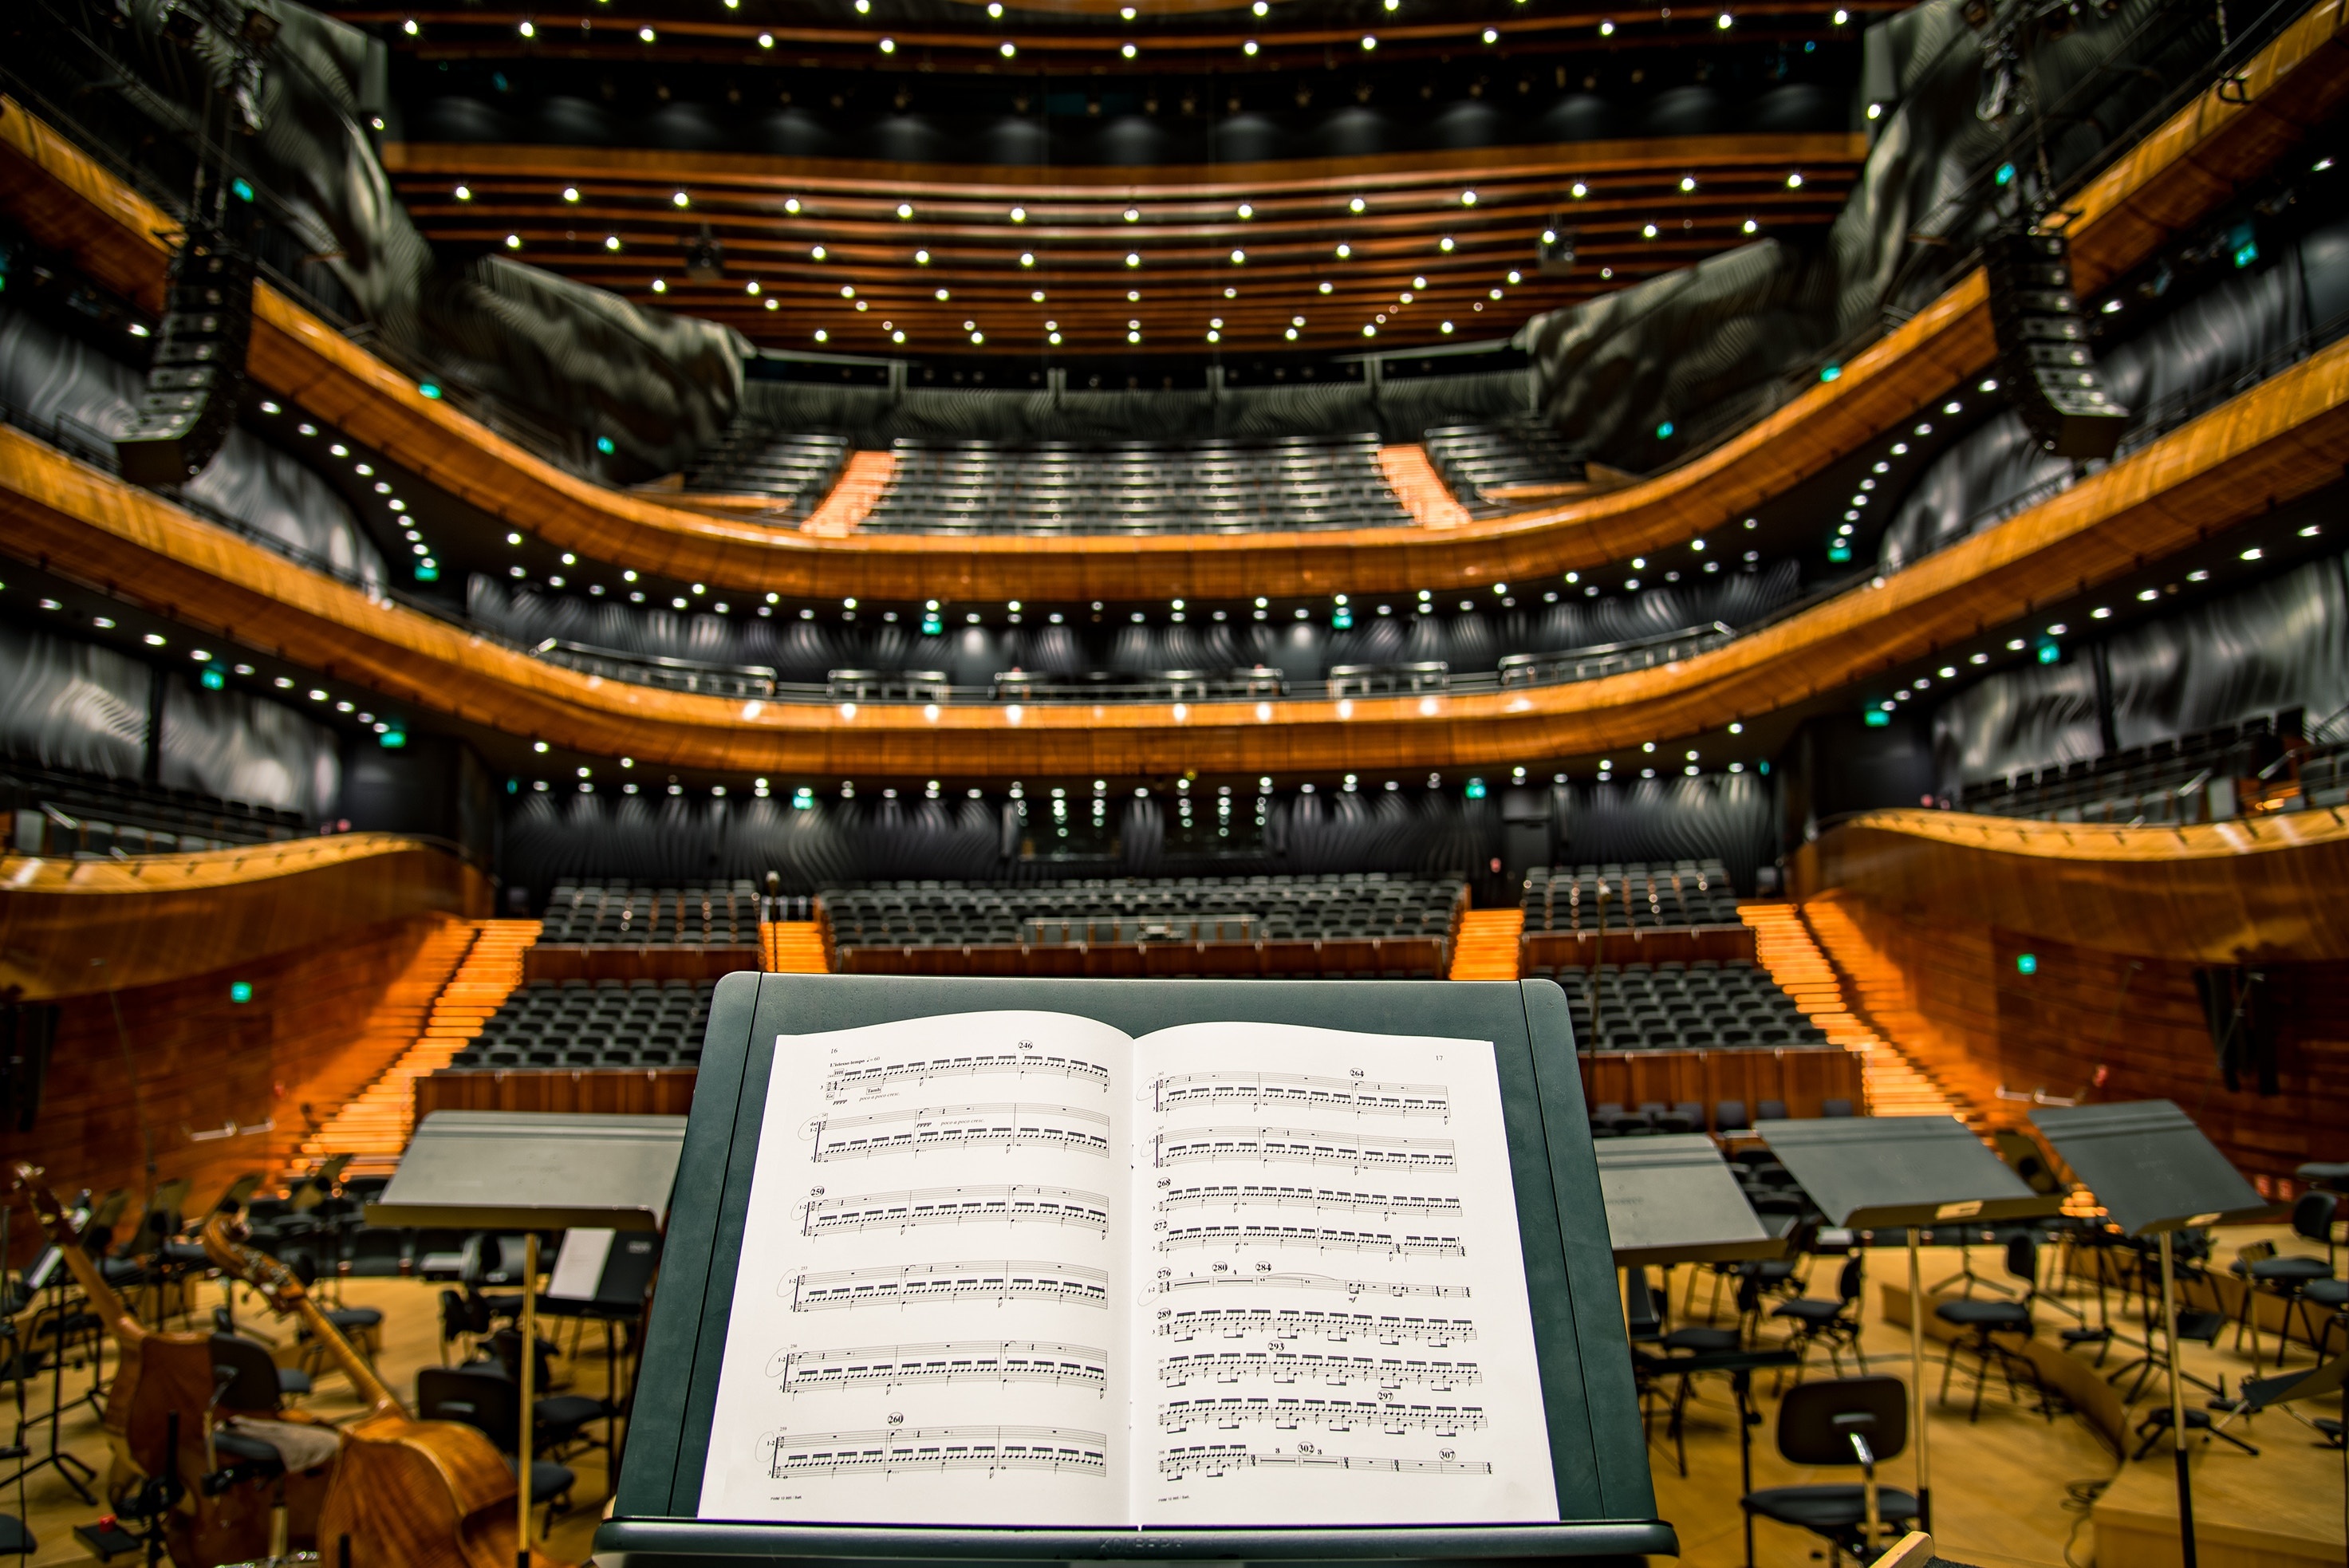 Orchestra: Music stand, Orchestra symphony hall, Balcony levels, Stage performance. 2950x1970 HD Wallpaper.